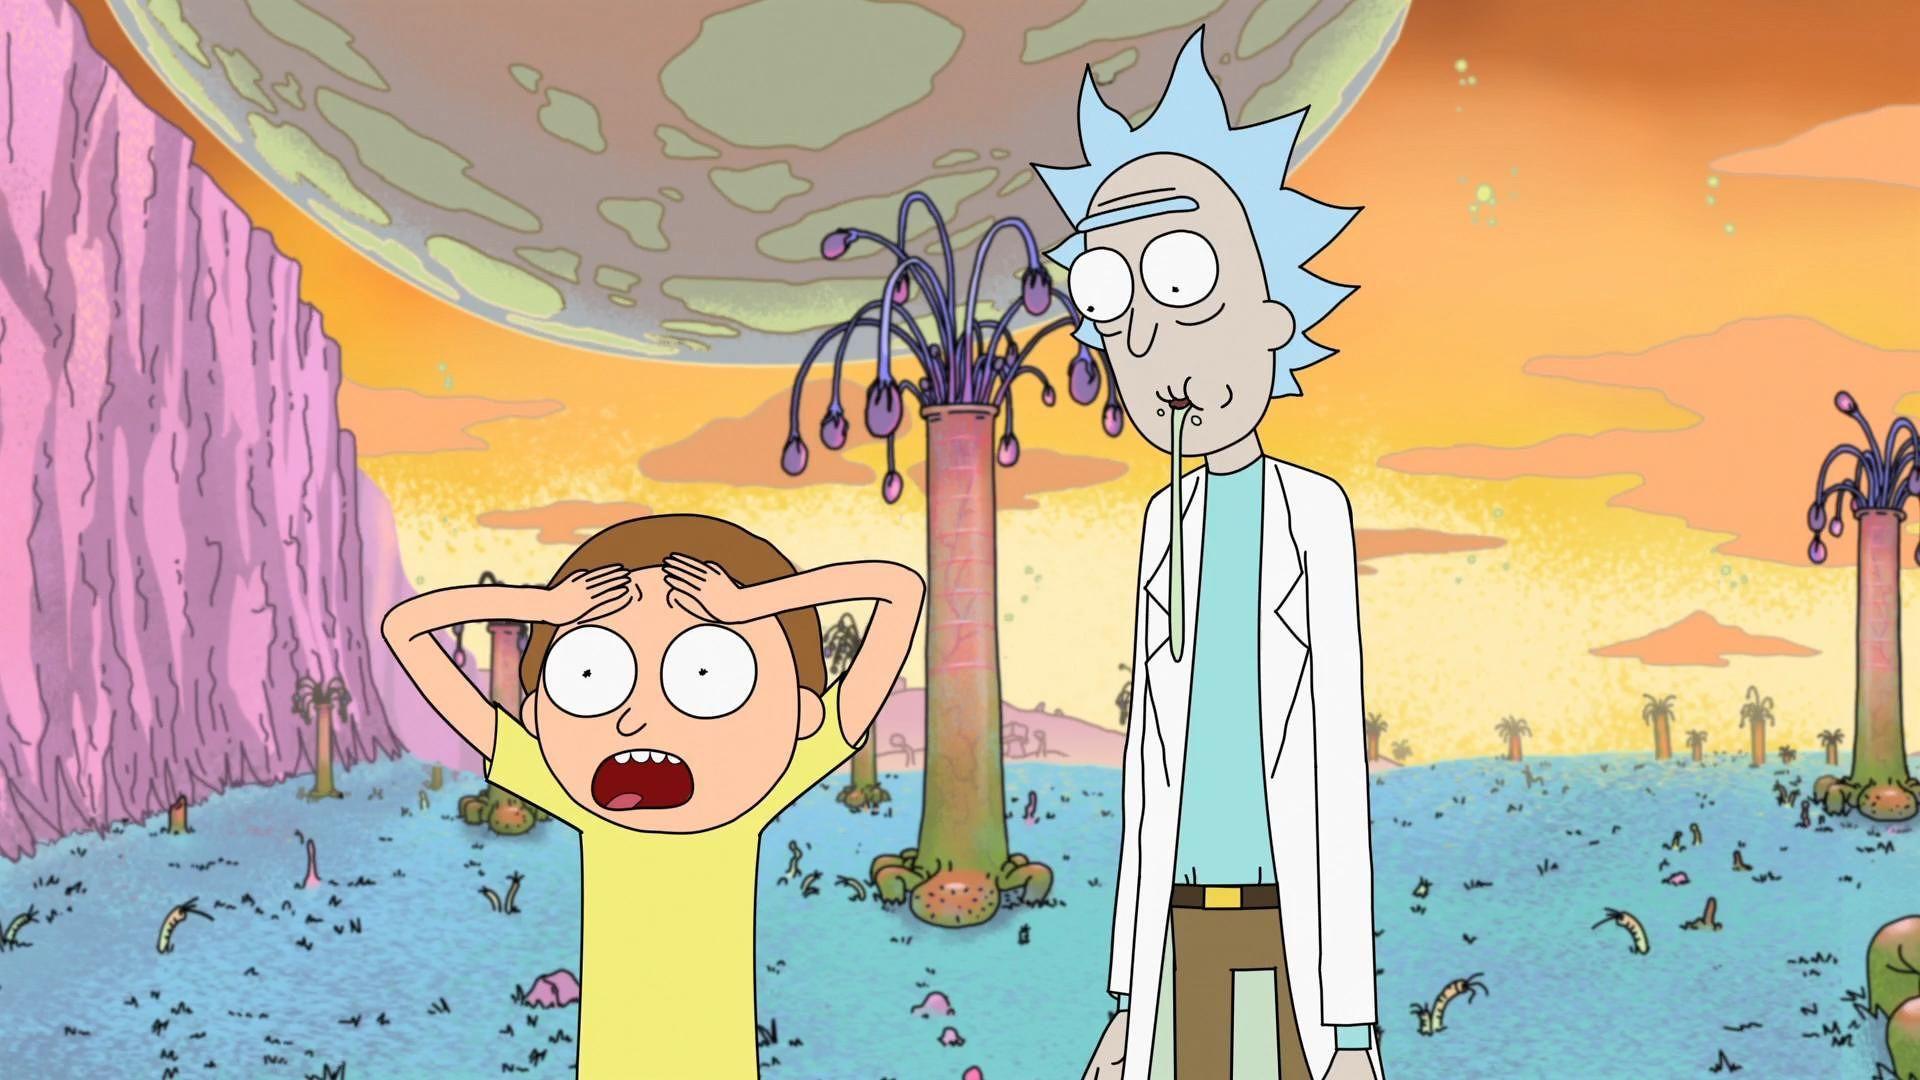 Rick And Morty' Season 3 News: Special Mini Episode Gets Fans